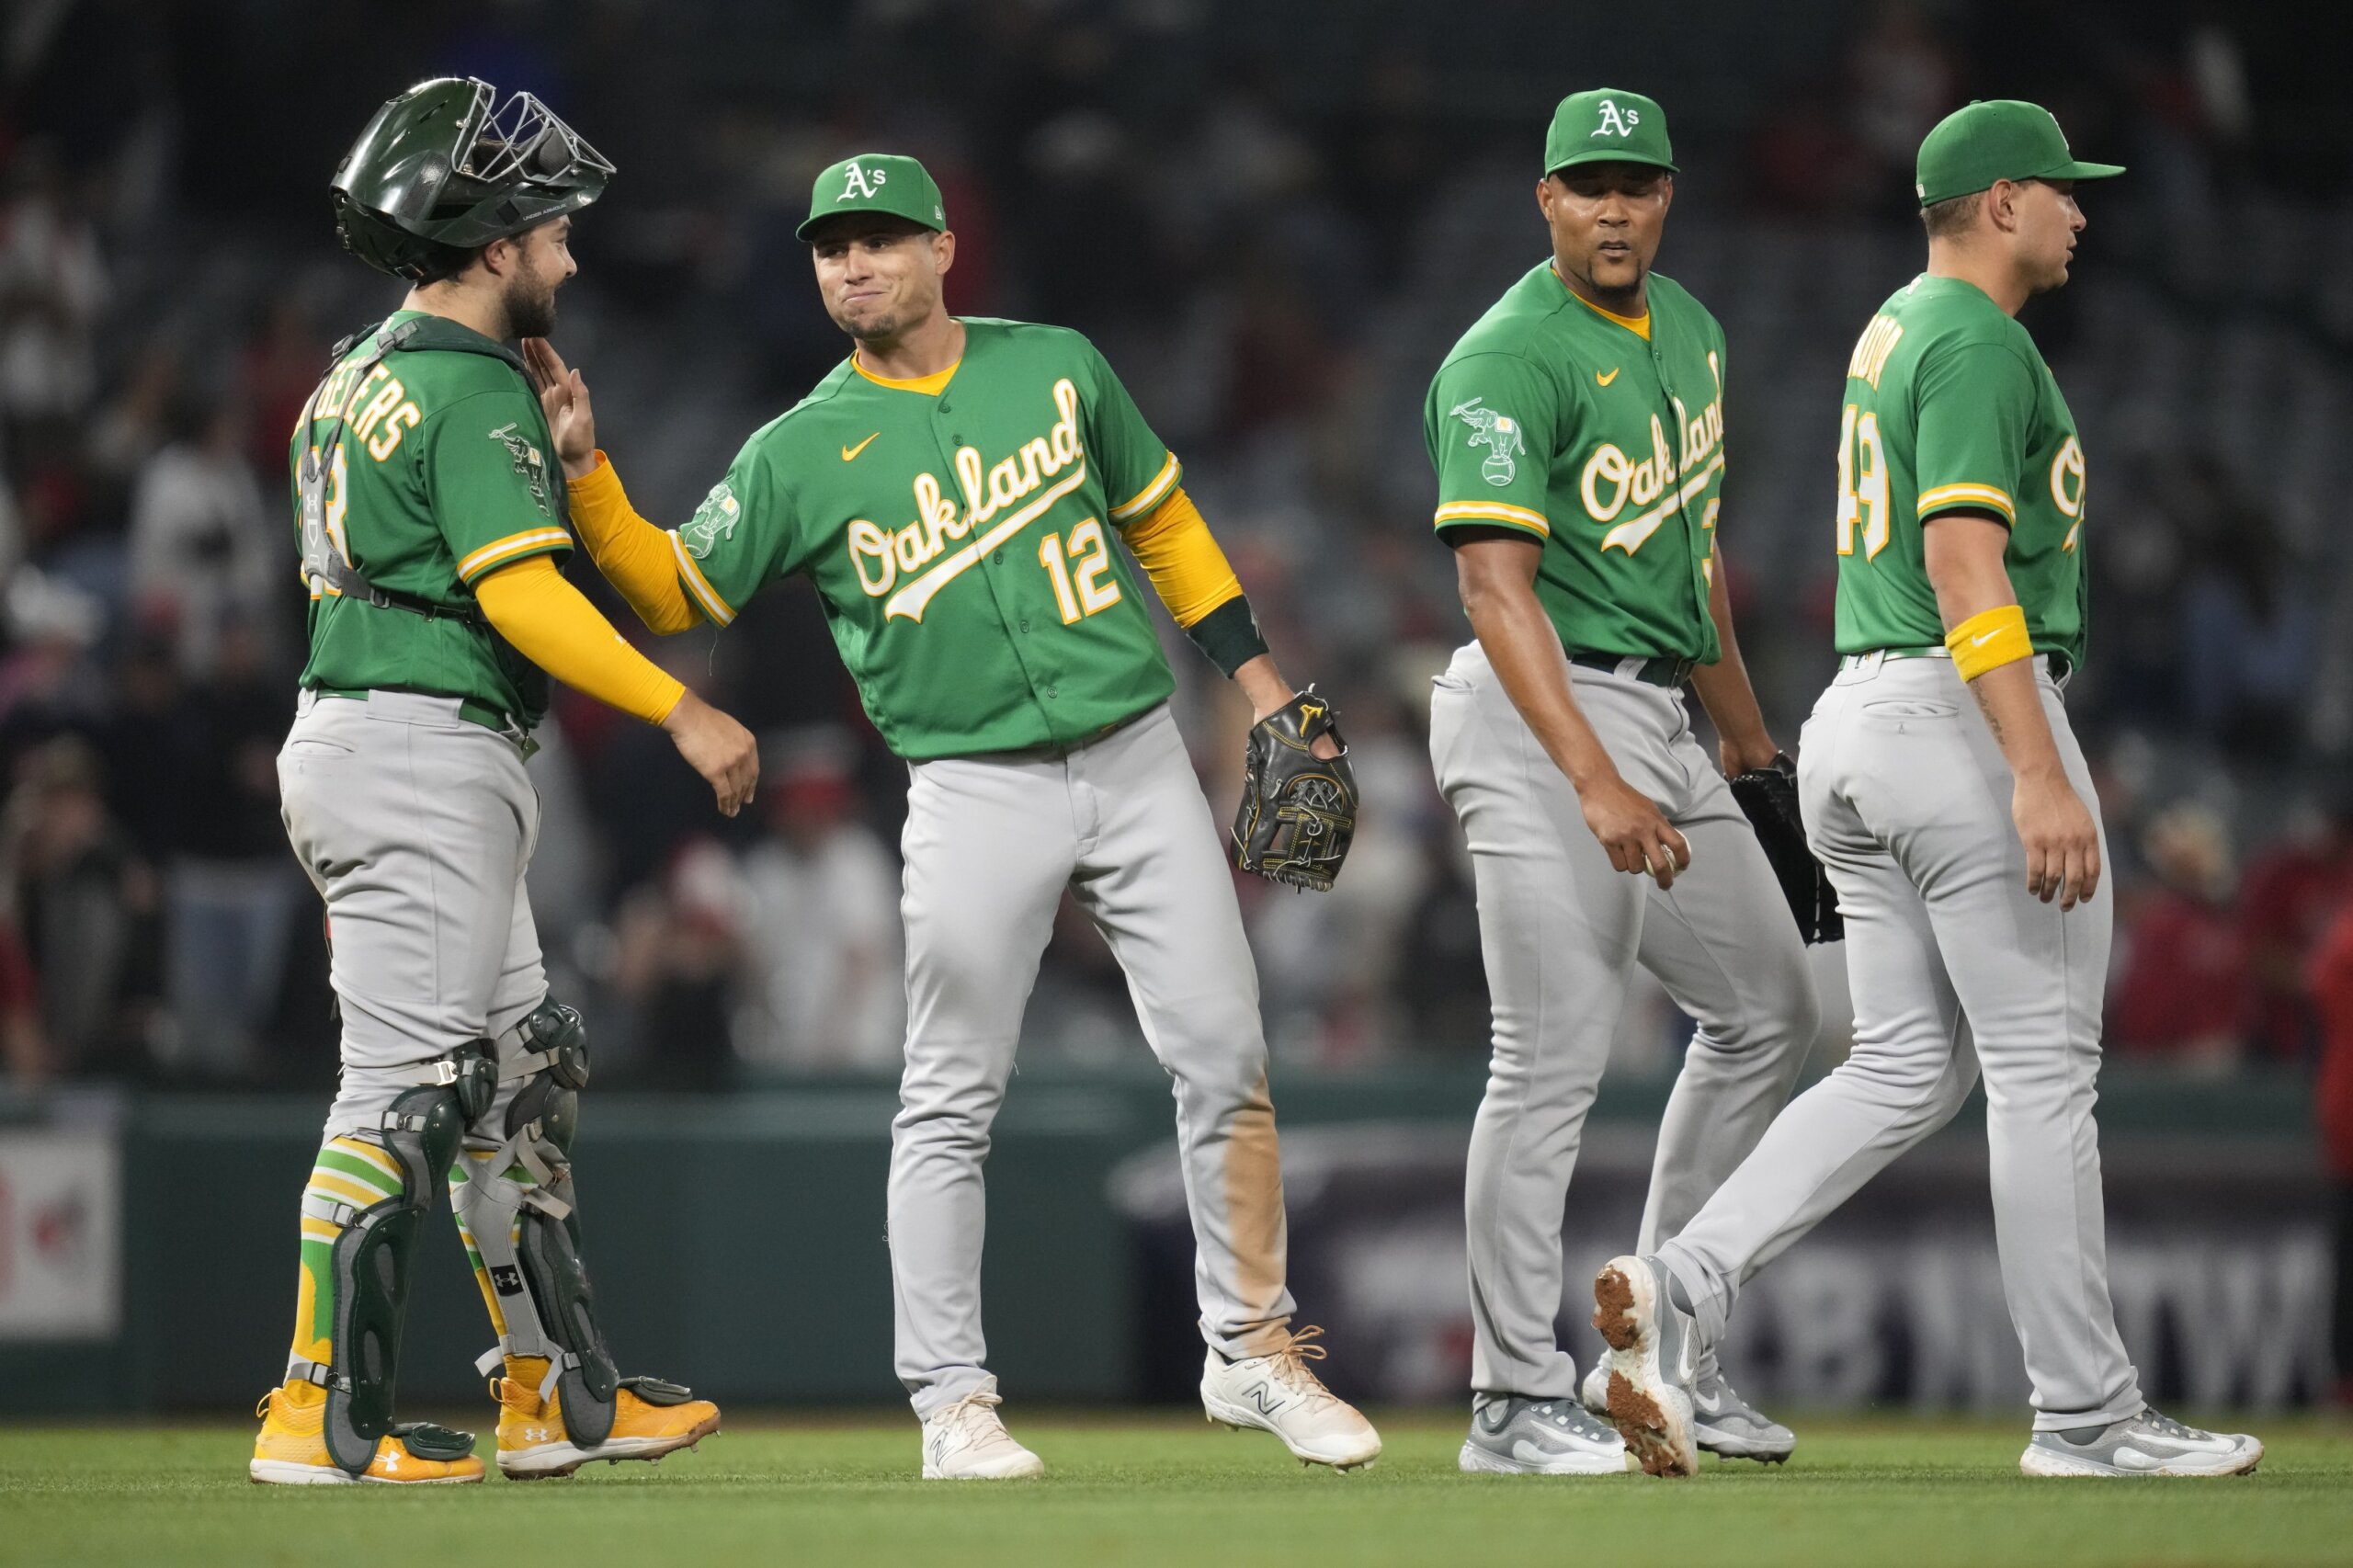 Athletics' dismal attendance shows fans were listening to Oakland, MLB